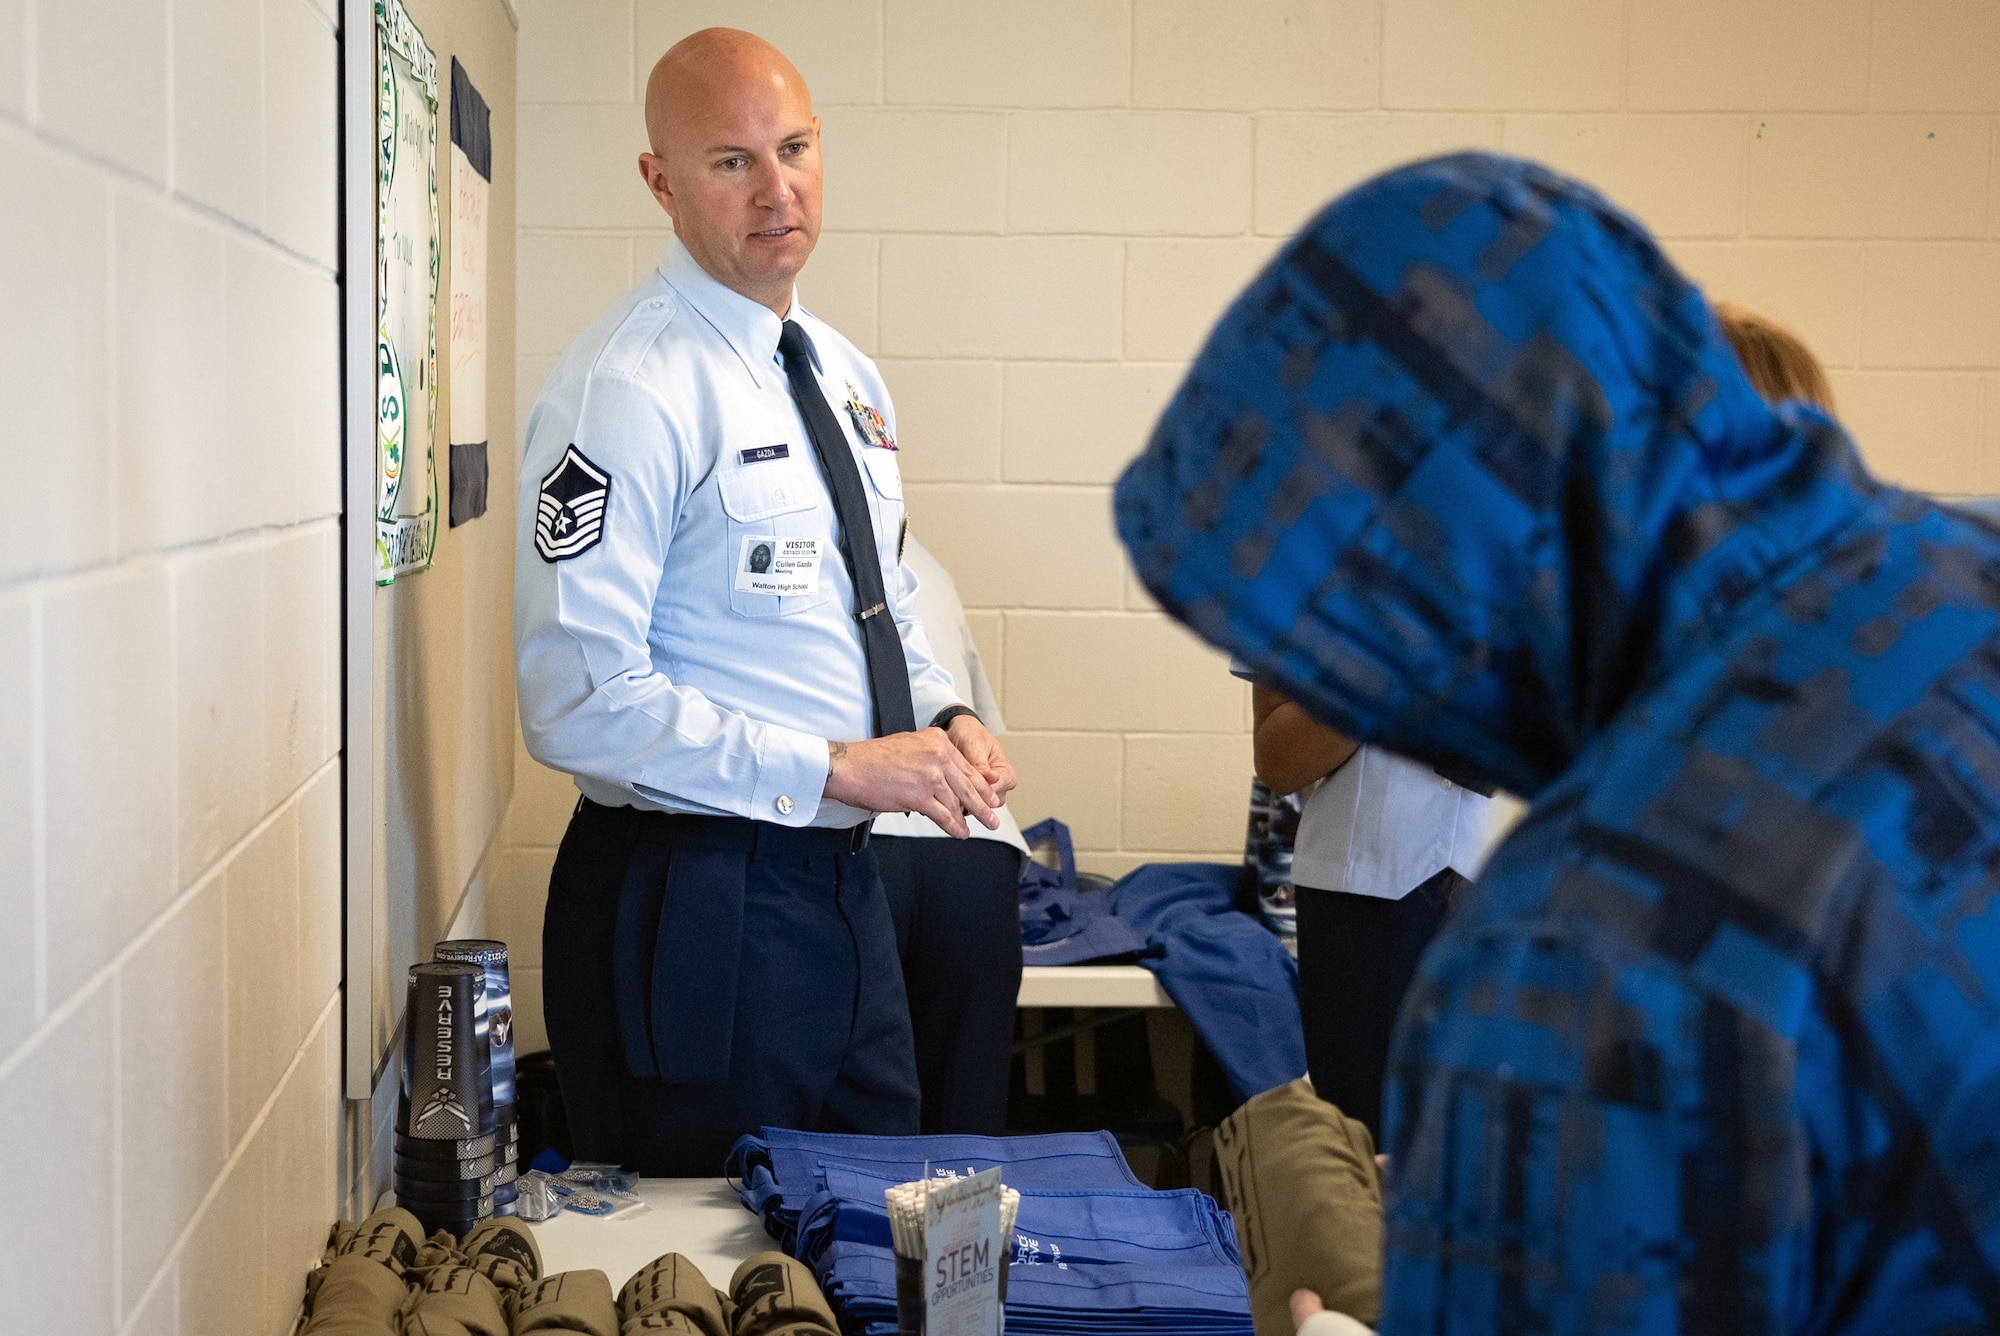 Air Force military member looks over at a high school student in a hoody browsing Air Force items at a recruiting event